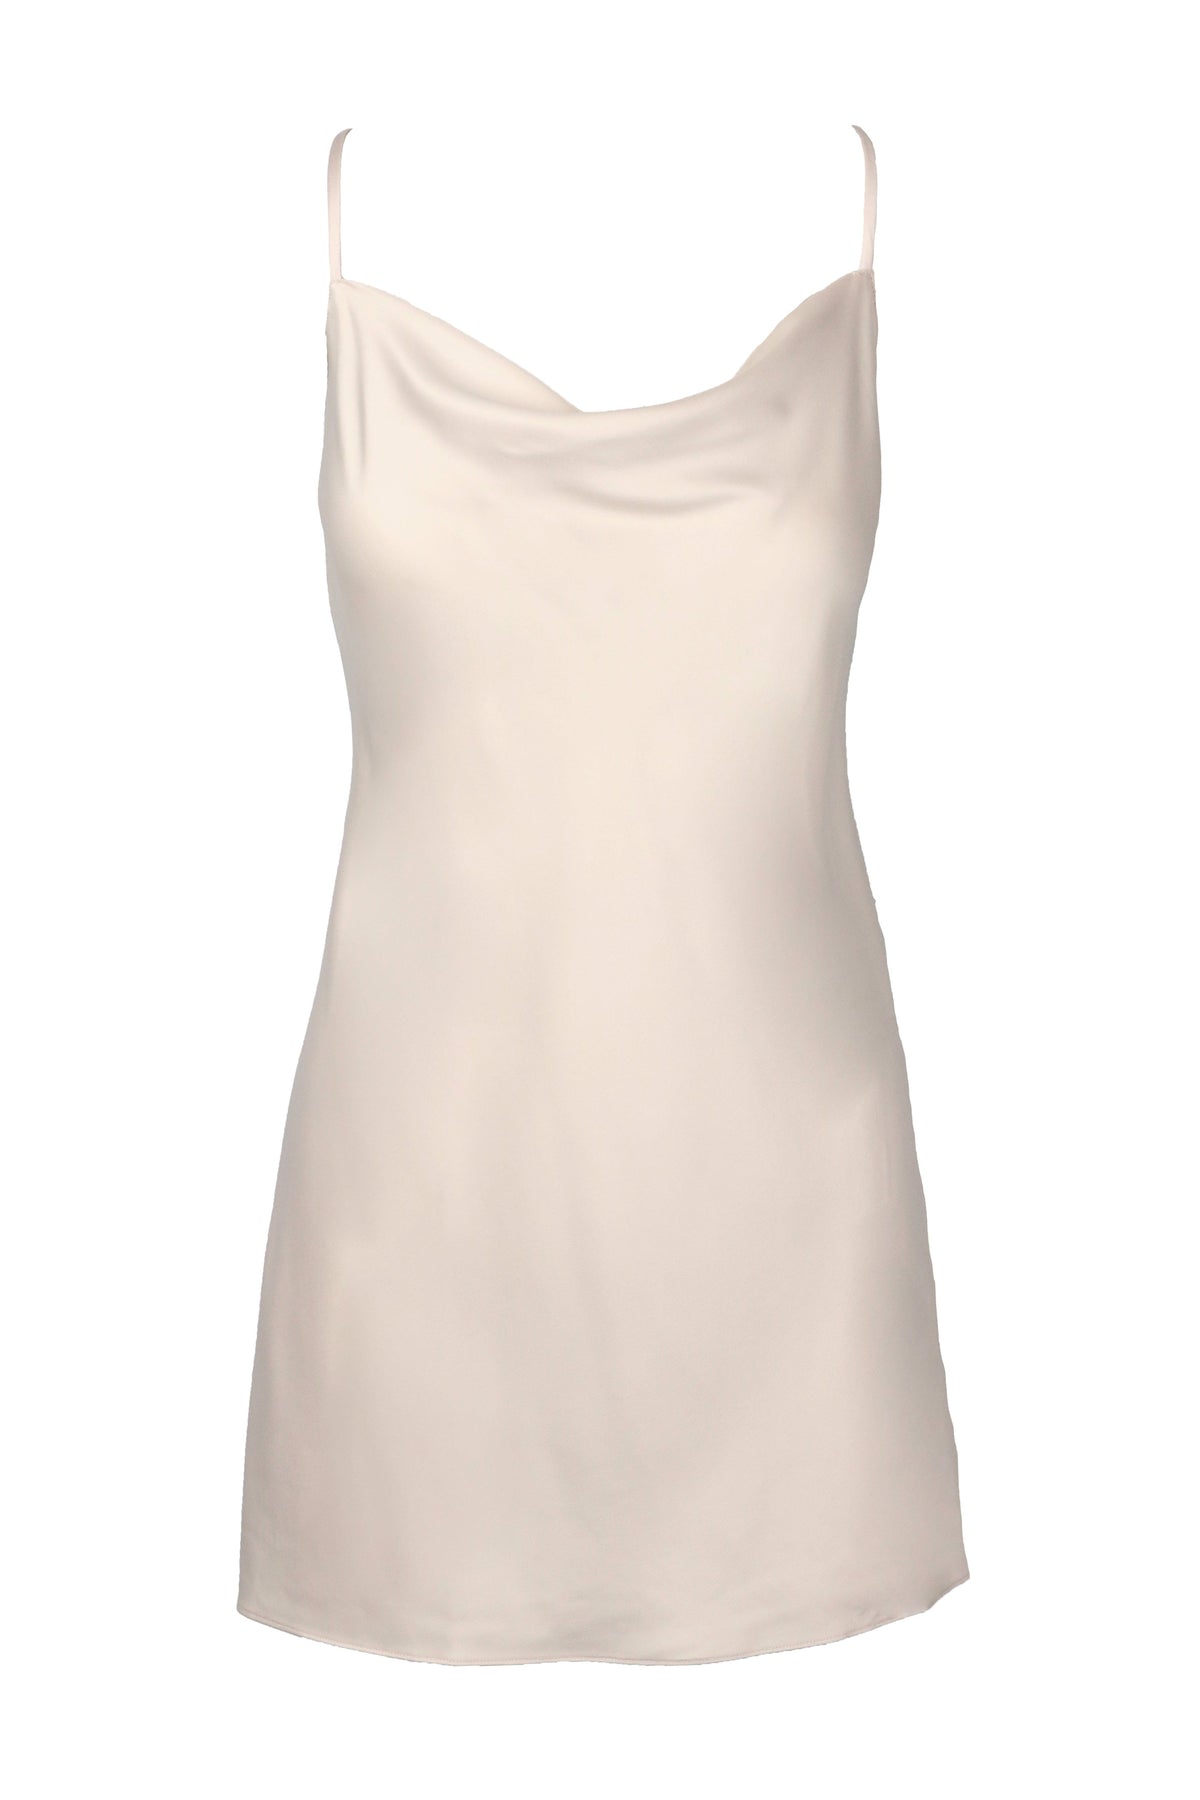 Rya Collection Chemise Champagne / XS Darling Chemise - Champagne